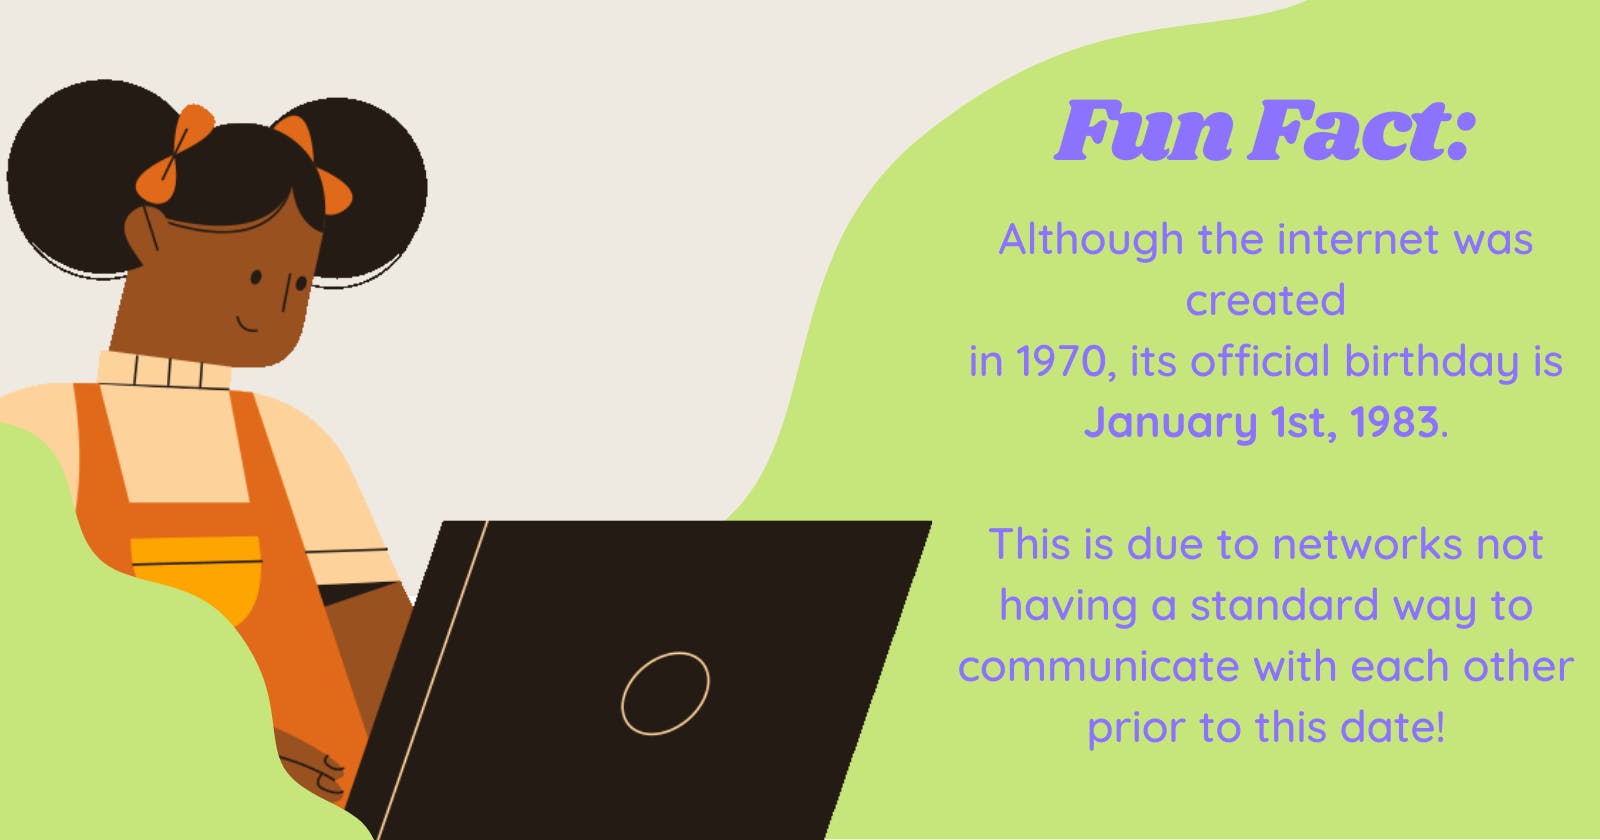 Fun fact: Although the Internet was invented in 1970, the official birthday for the internet is January 1st, 1983. This is due to networks not having a standard way to communicate with each other prior to this date!